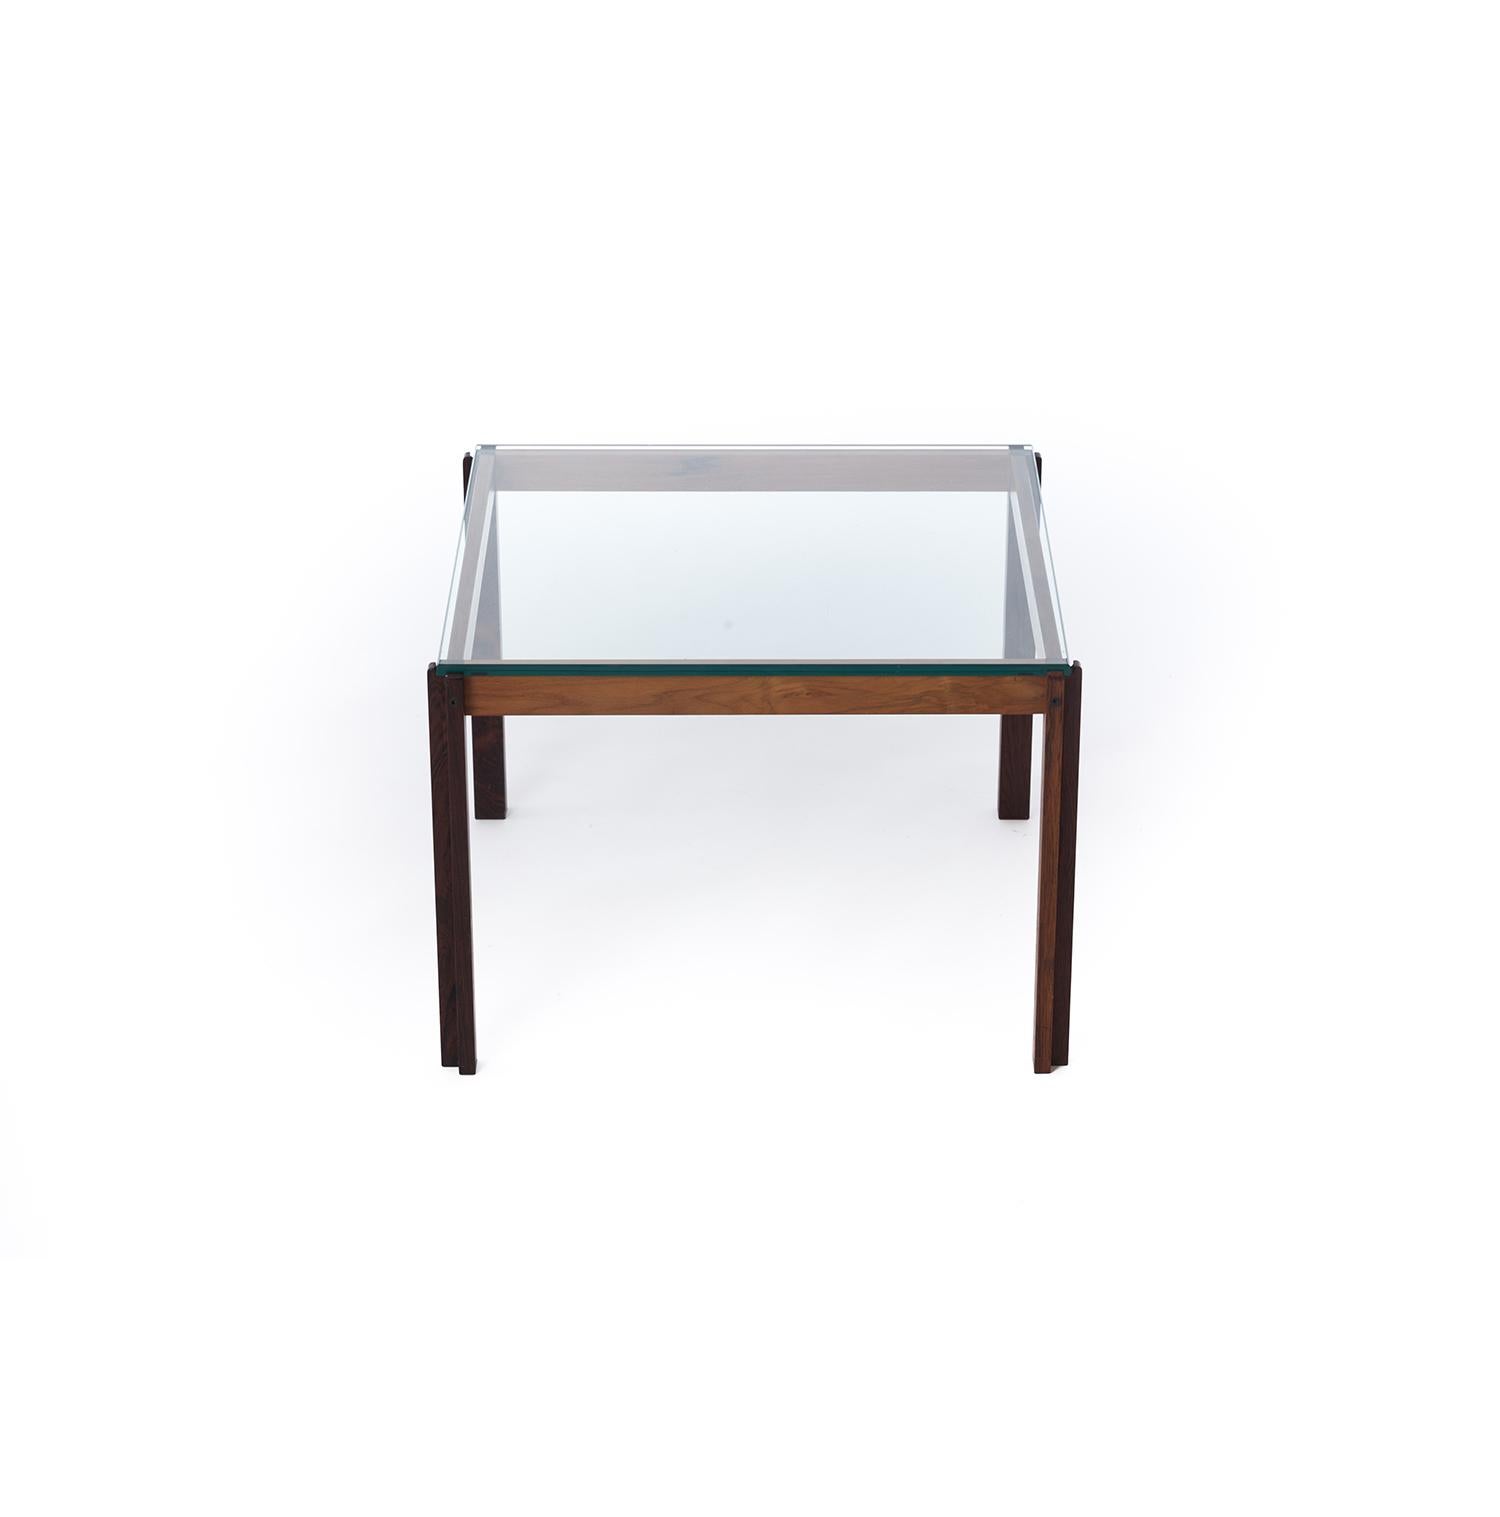 This elegant side table is crafted from beautifully figured rosewood with an inset glass top. It is a Danish modern original piece however it could easily blend in an international style environment with it's light and airy profile coupled with the